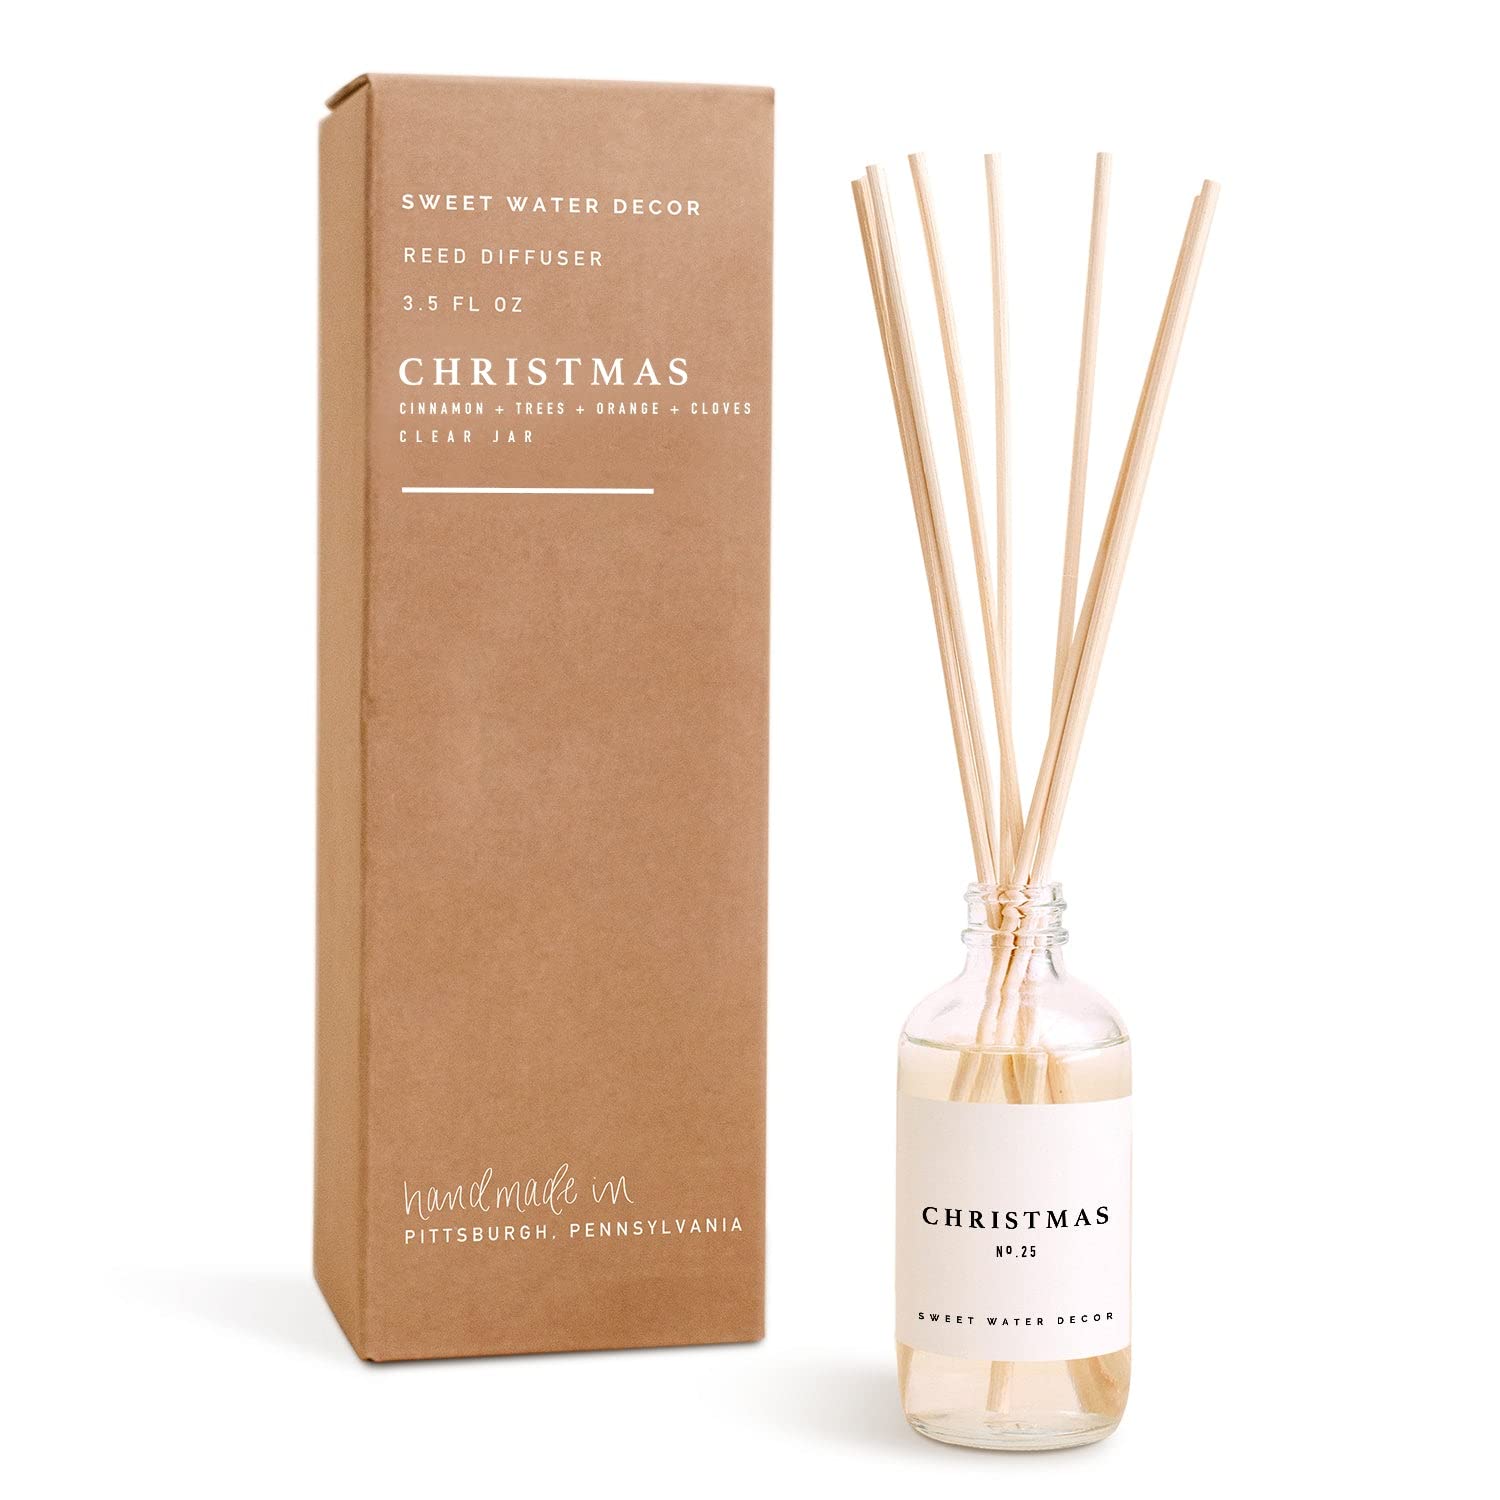 Sweet Water Decor Christmas Reed Diffuser Set | [...]